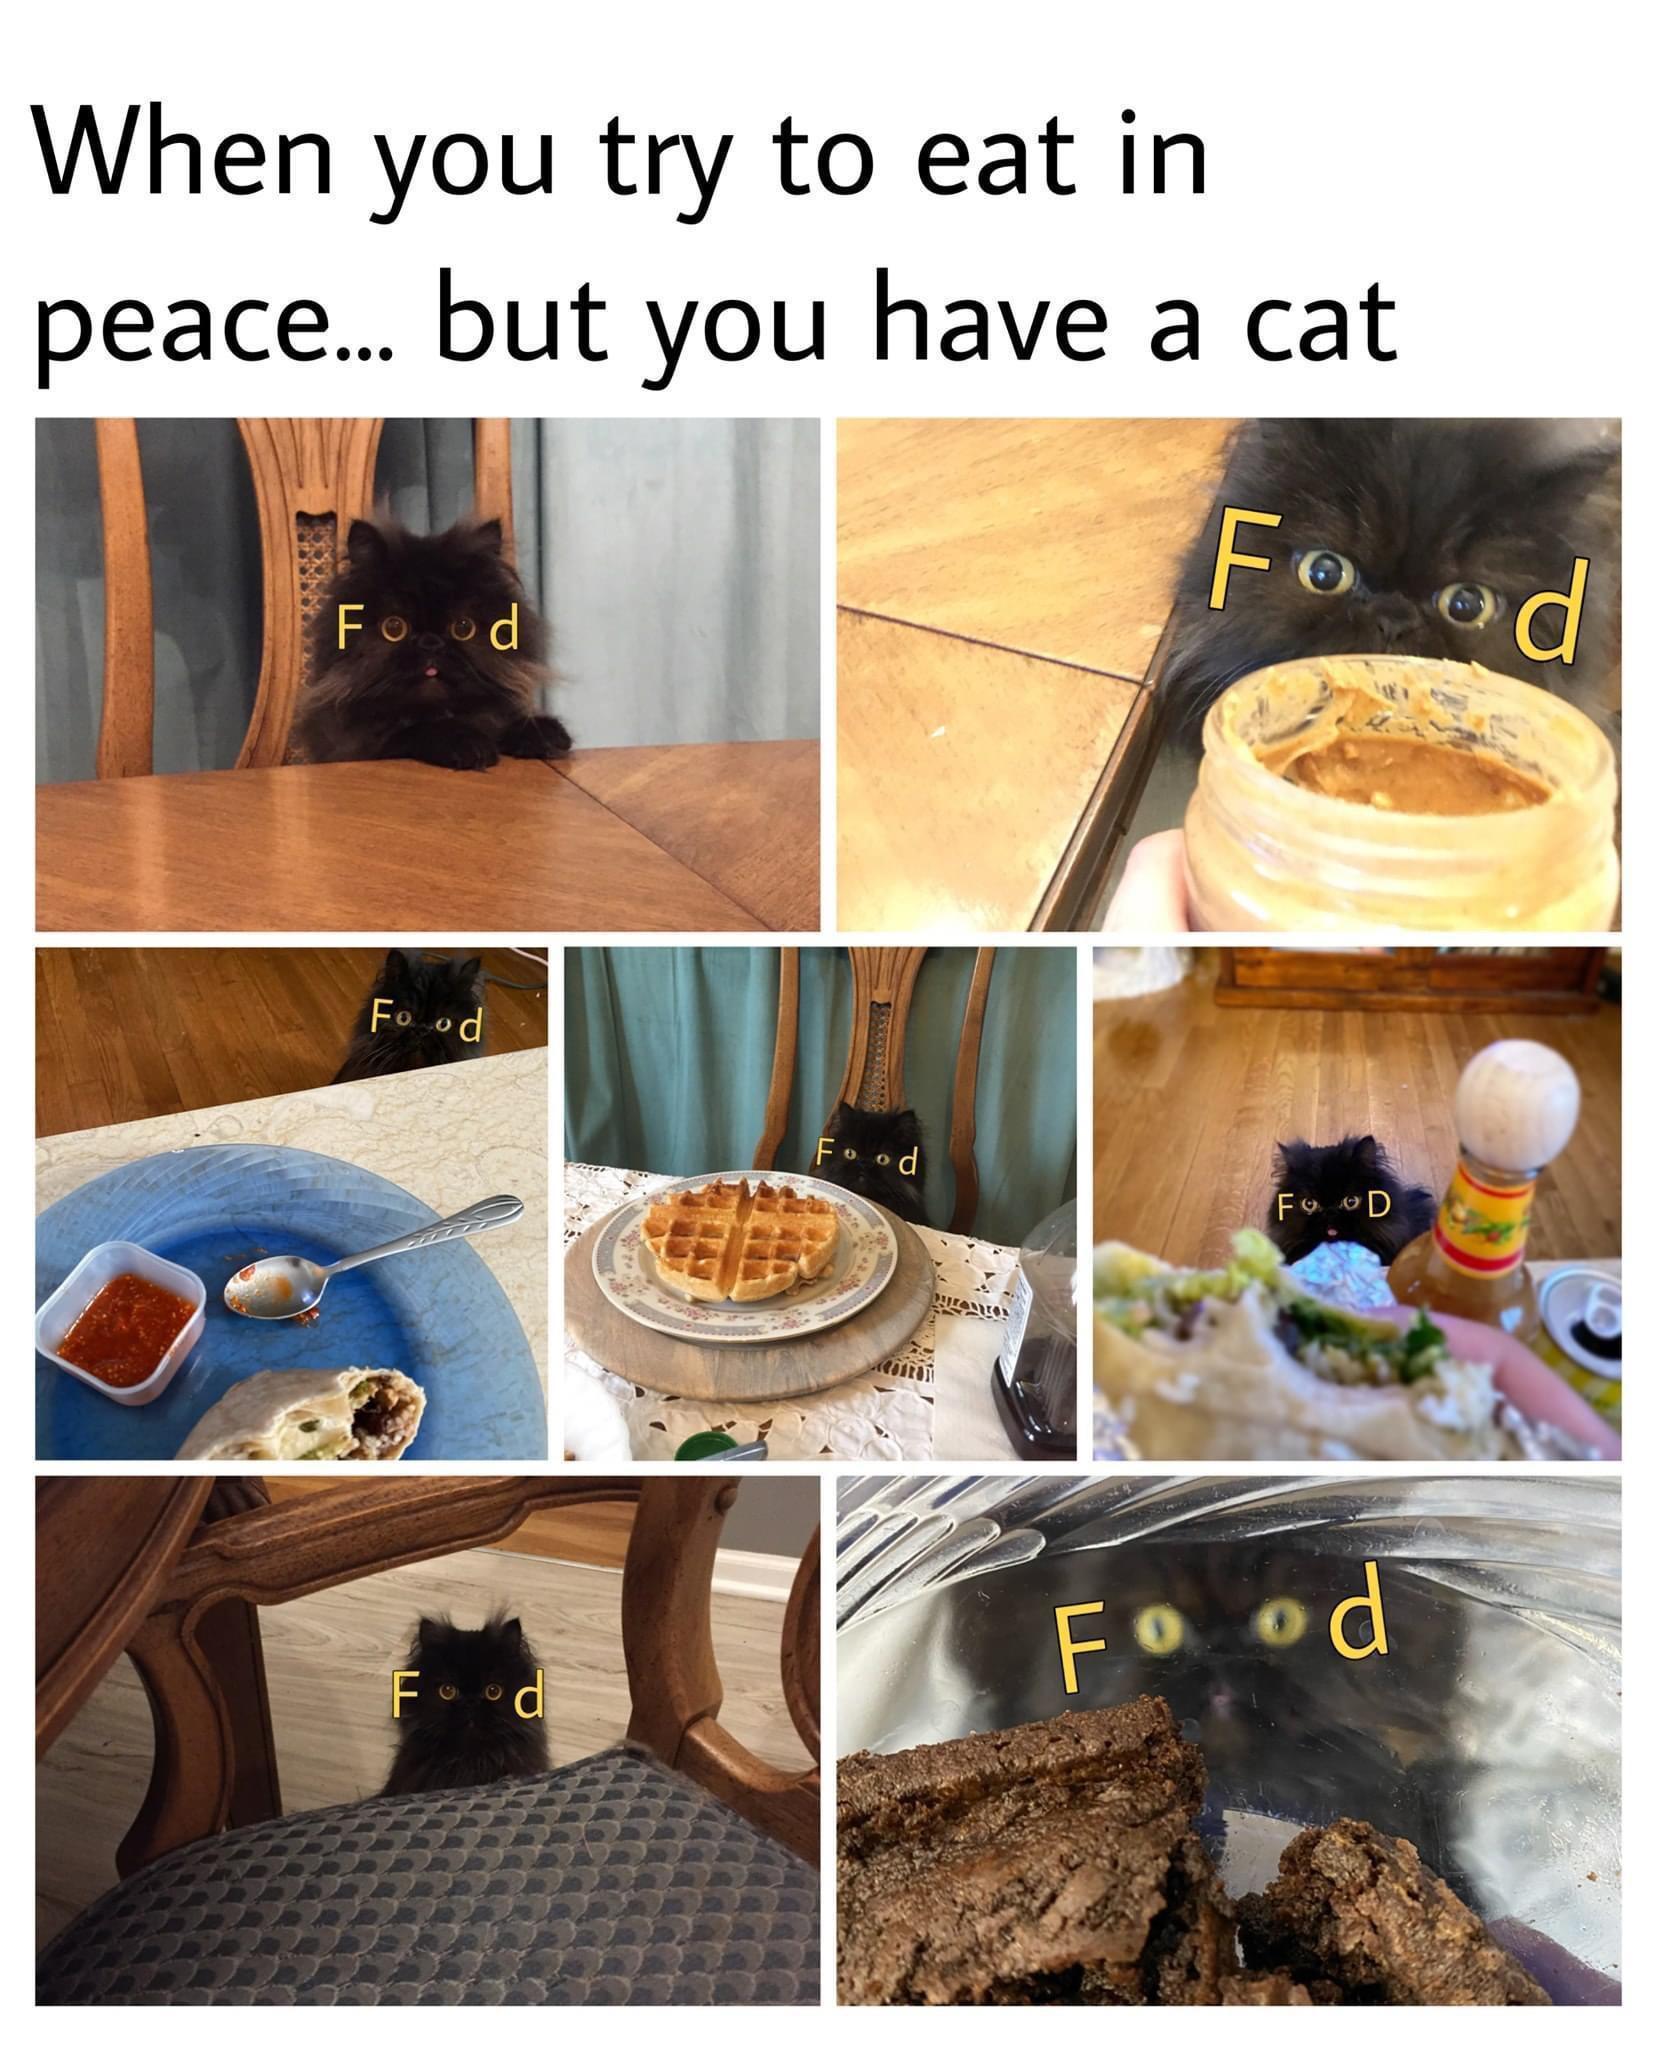 there+is+no+peace.+only+cat